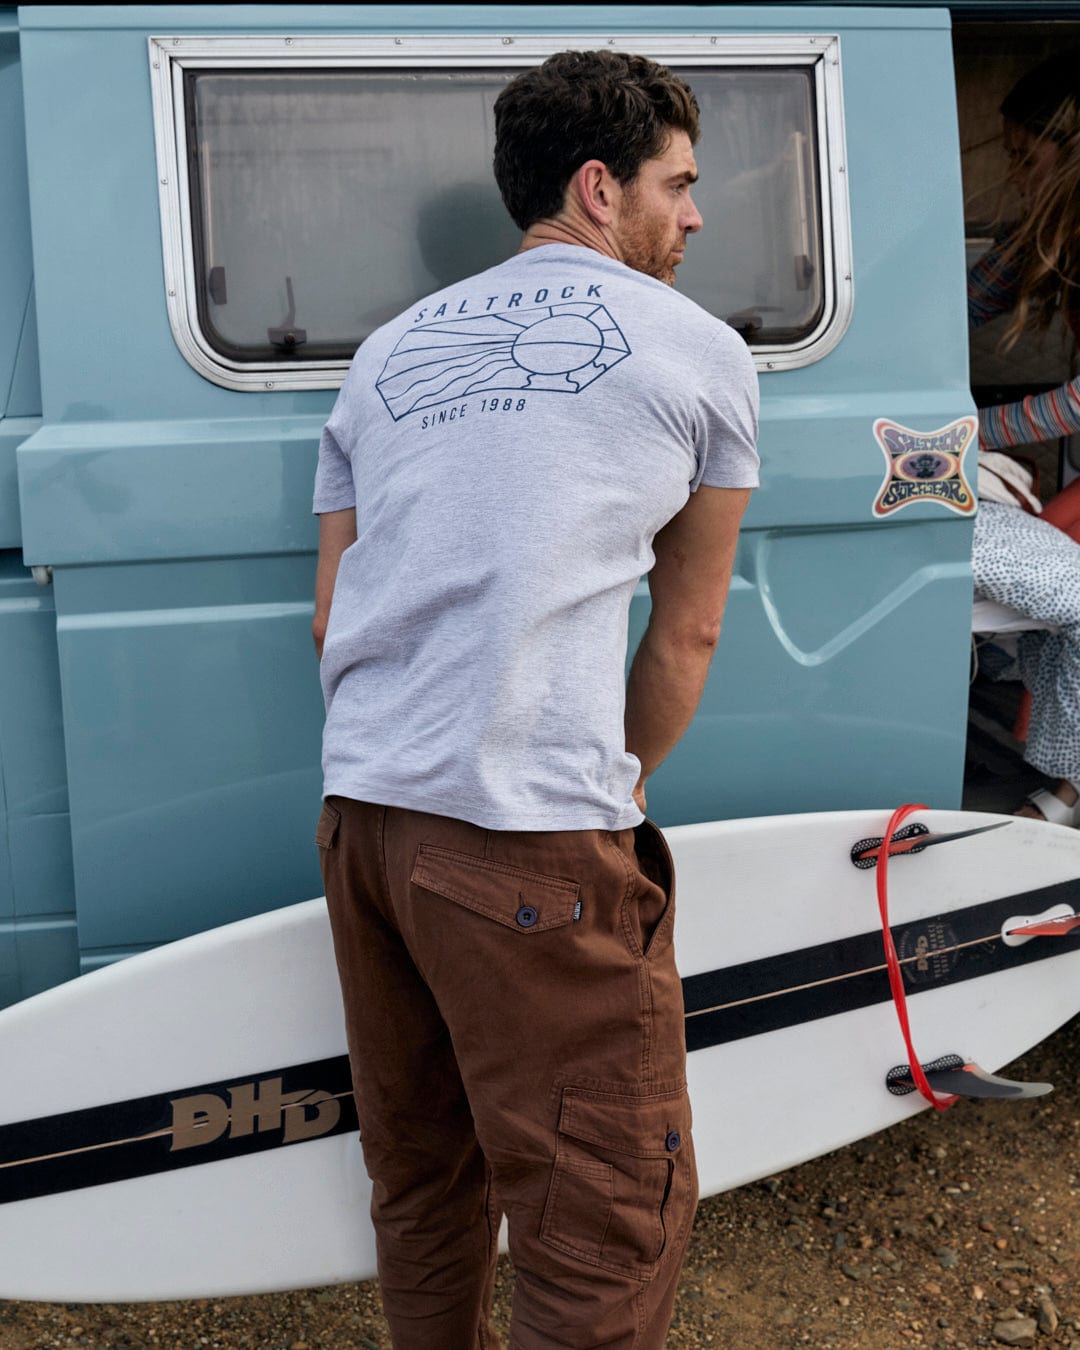 Man standing next to a camper van holding a surfboard, with a woman visible inside the van. Both are wearing Saltrock Godrevy 2 - Mens Cargo Trousers - Brown attire.